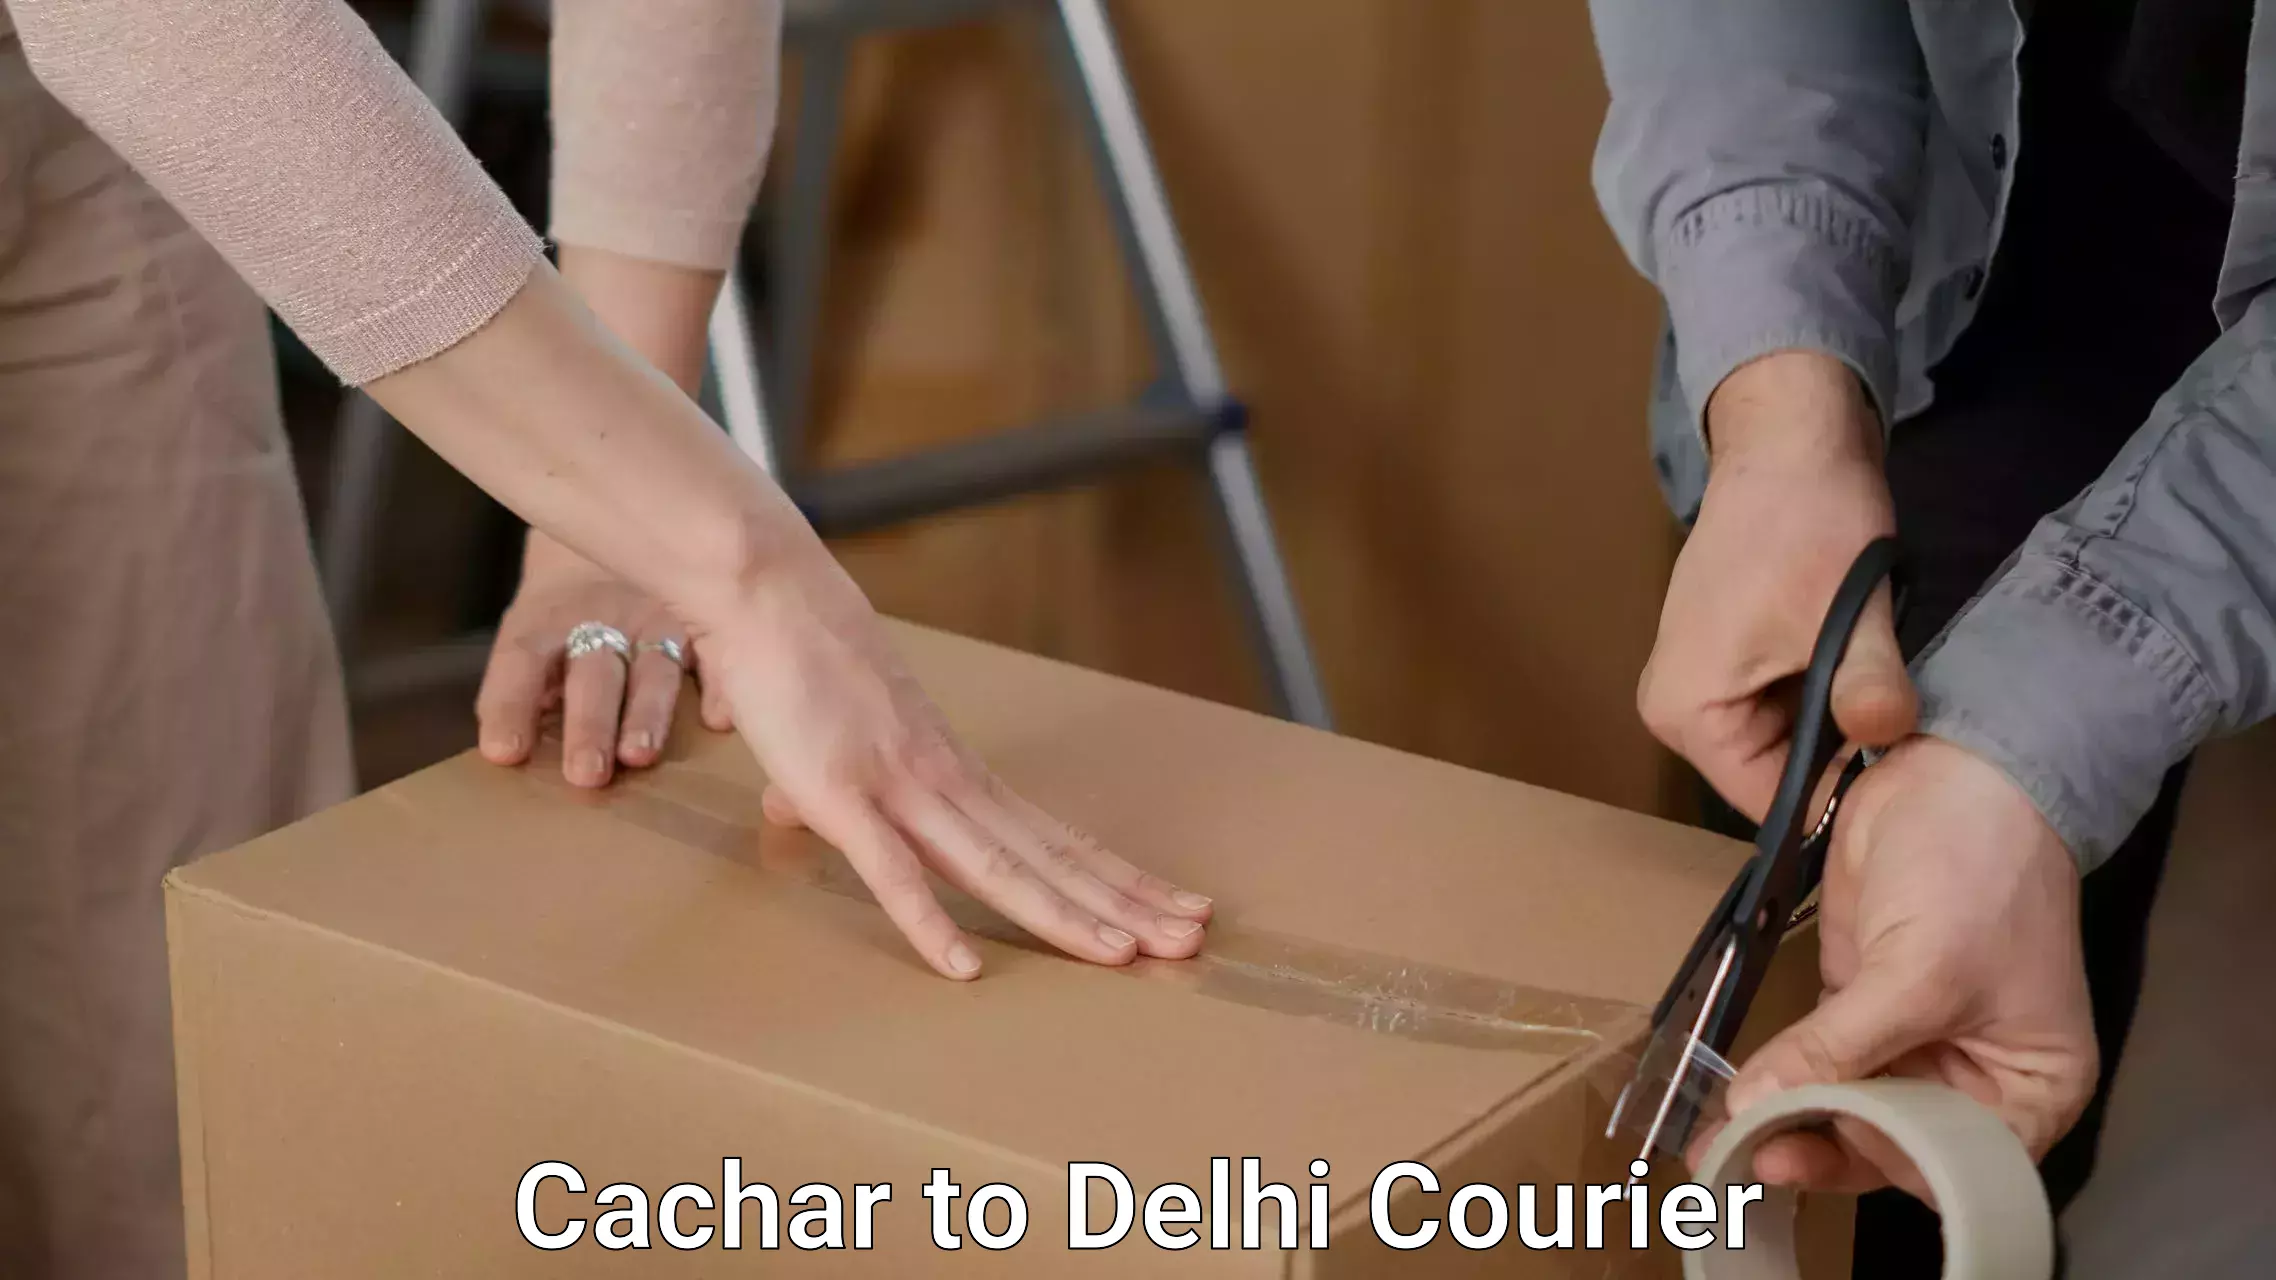 Furniture moving experts Cachar to Delhi